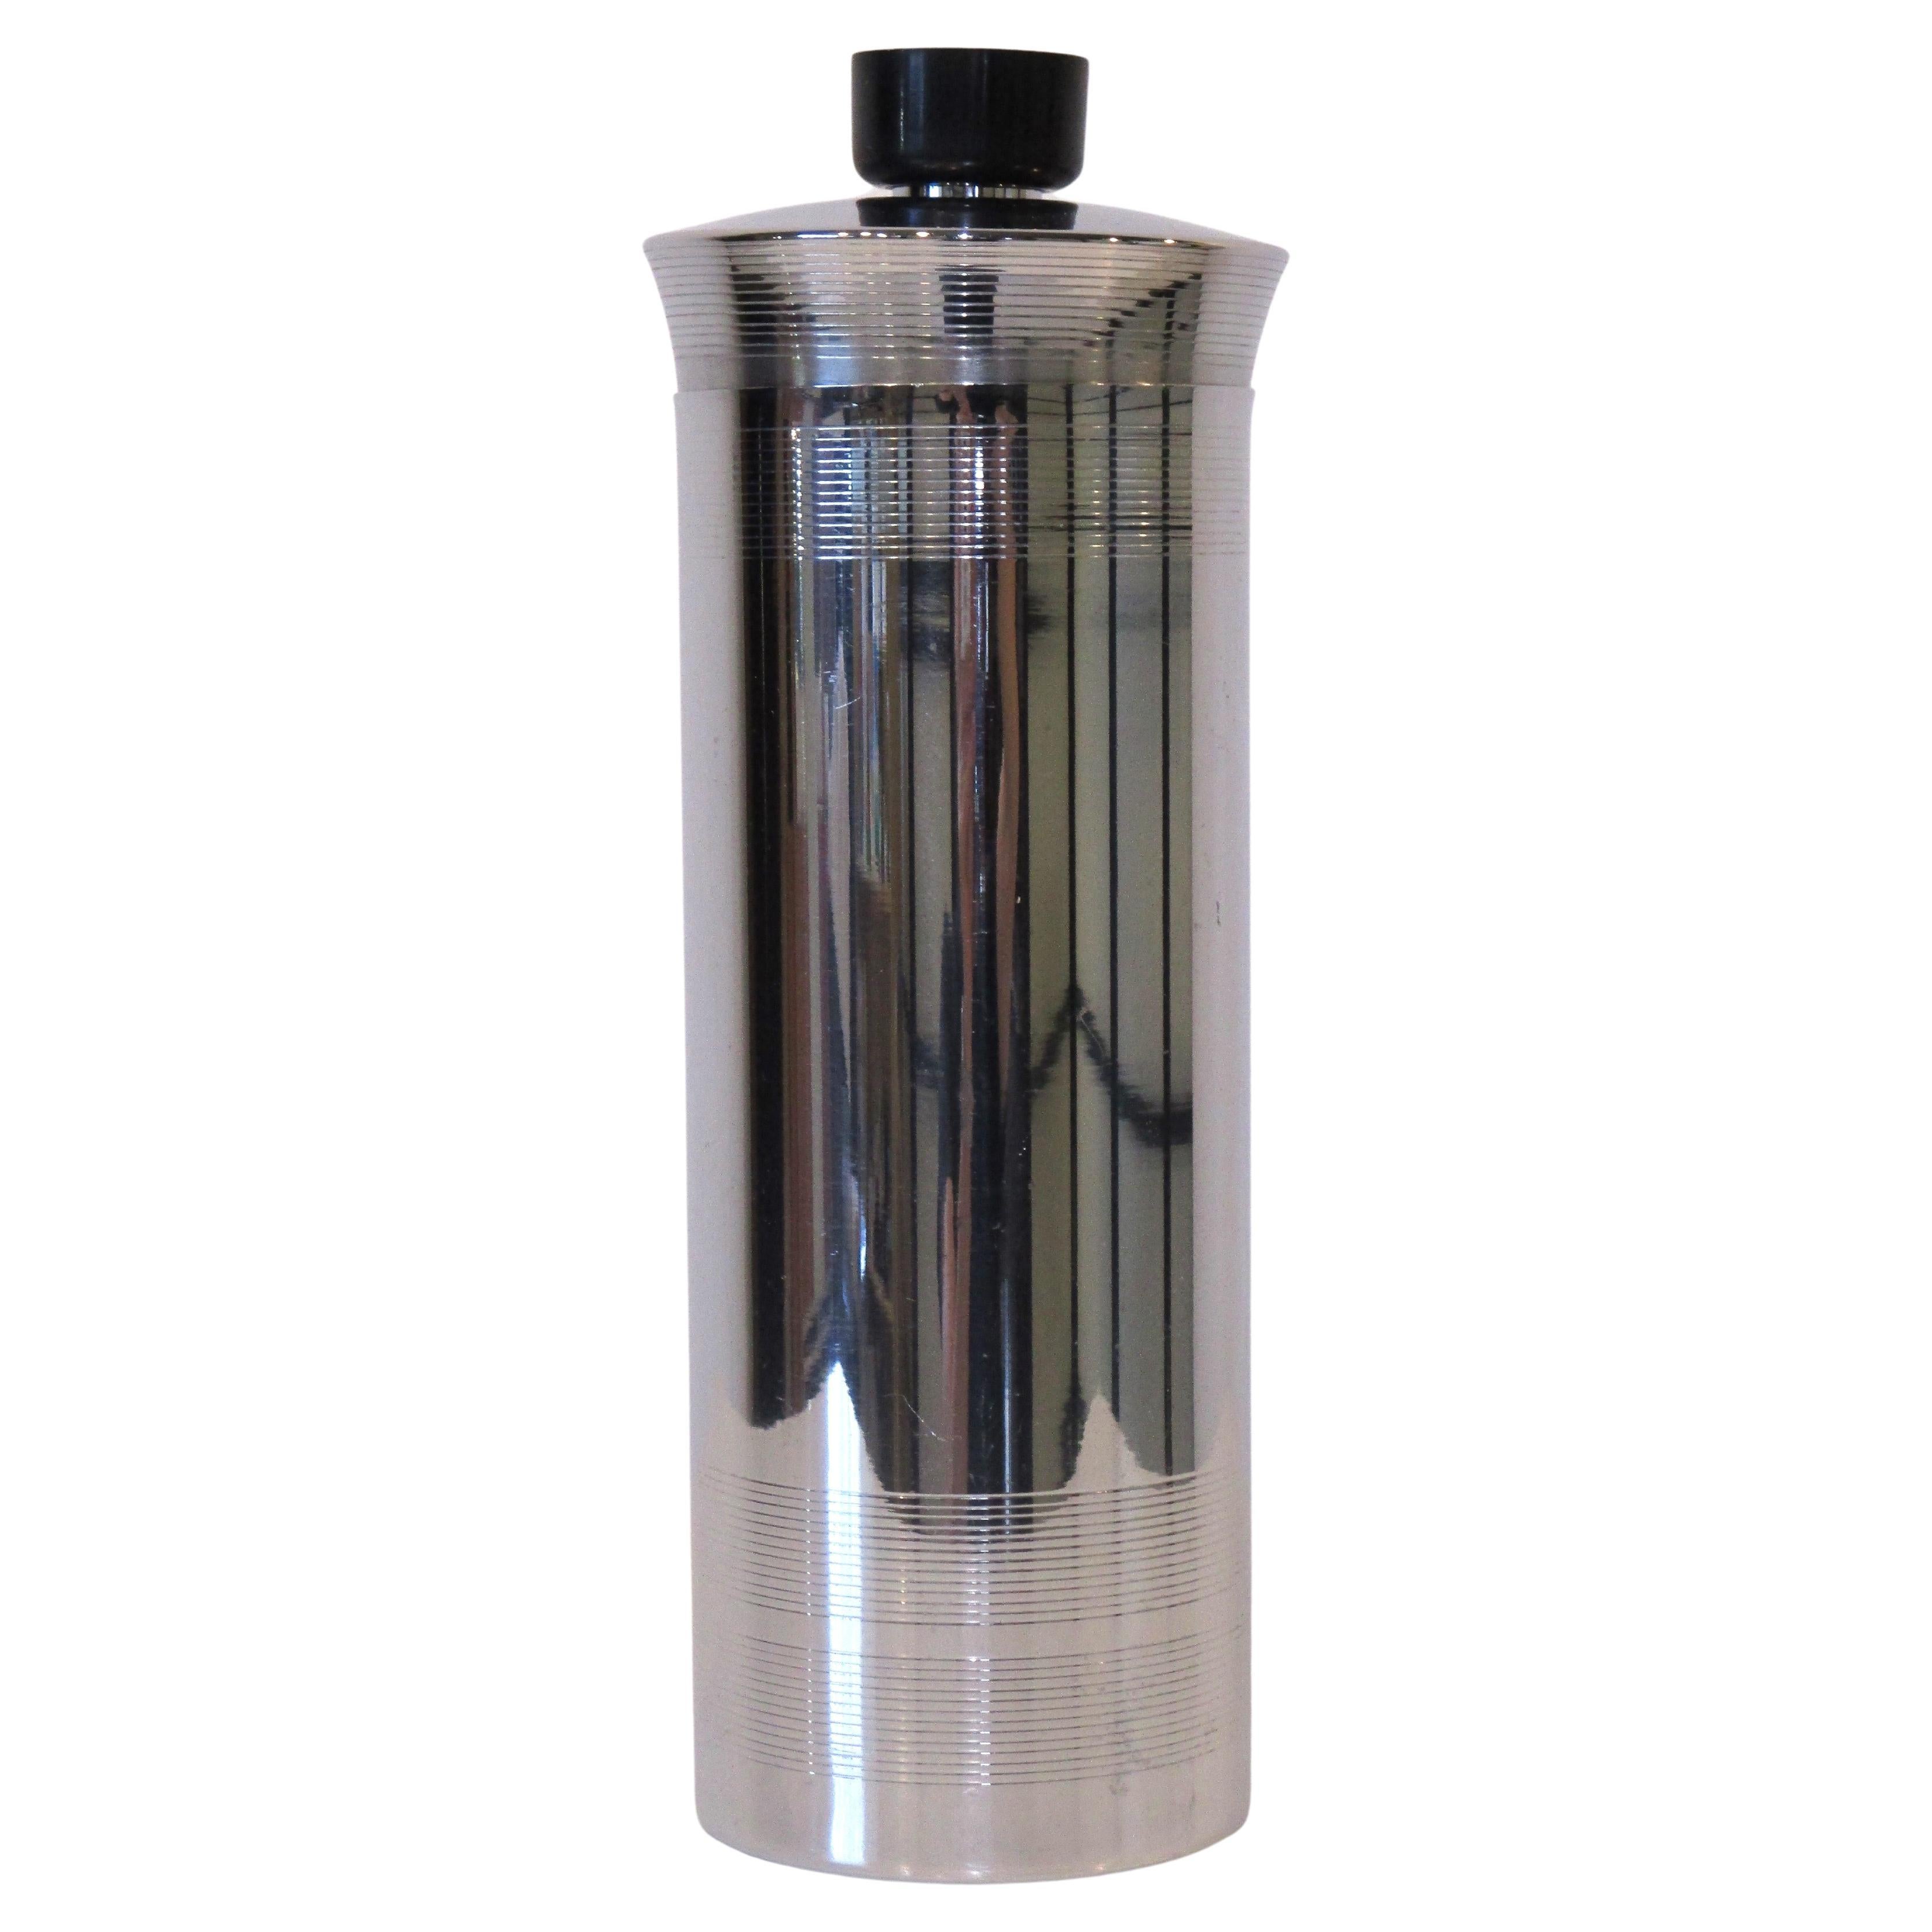 Chrome Art Deco Cocktail Shaker in the Style of Manning Bowman